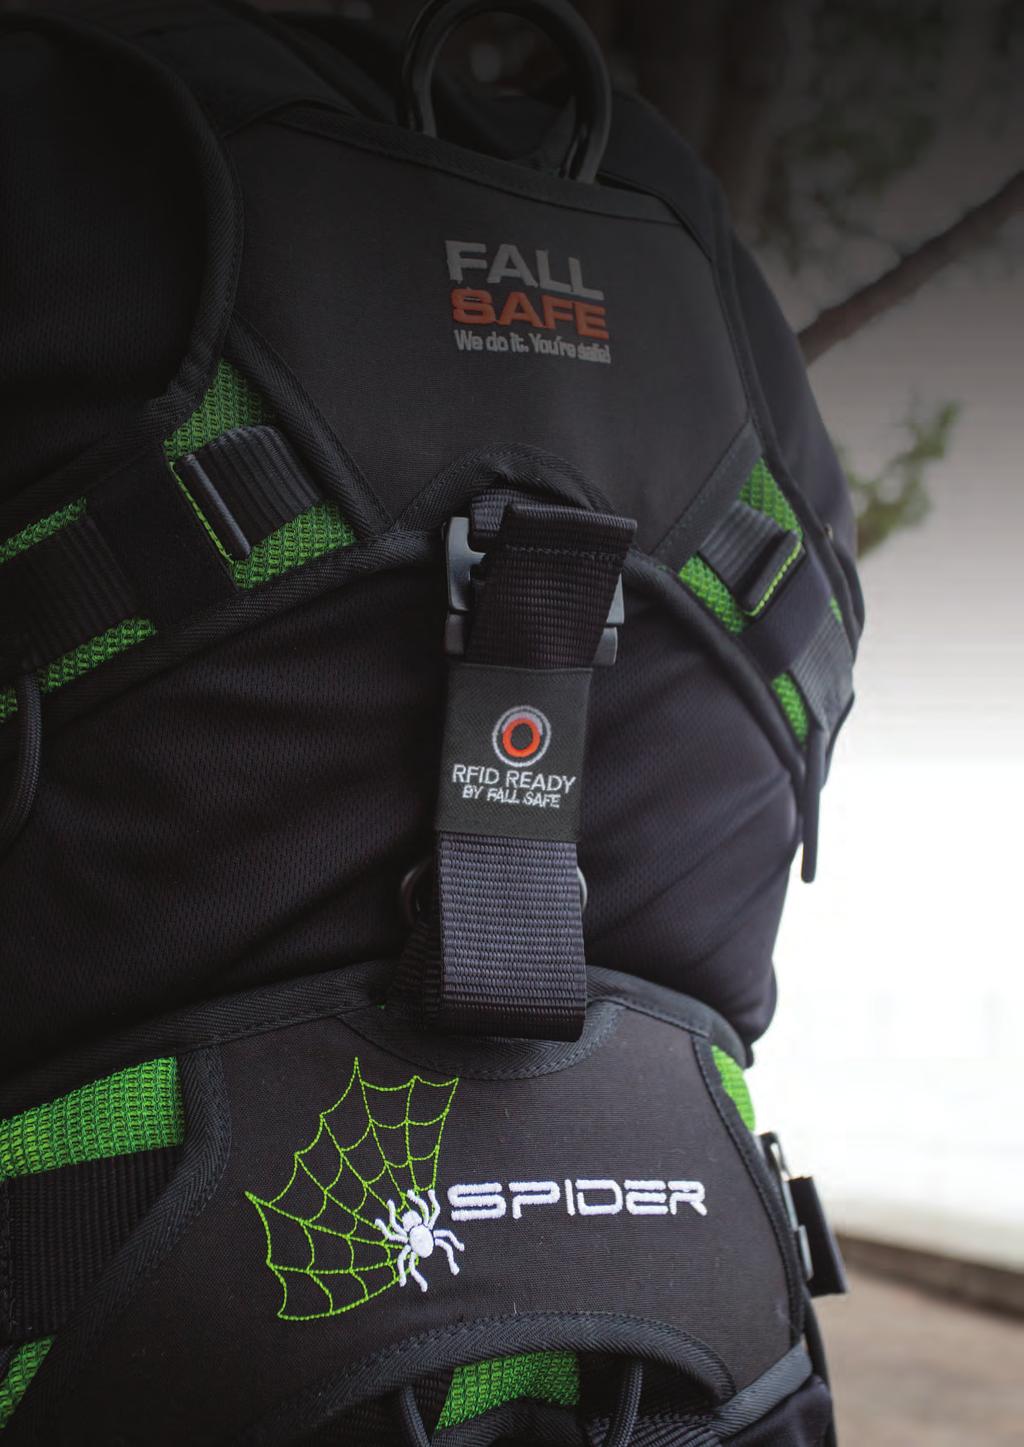 FS243 SPIDER HARNESS The Fall Safe Spider harness was specifically designed for rope access and rescue in order to cover any work situation in fall protection, work positioning